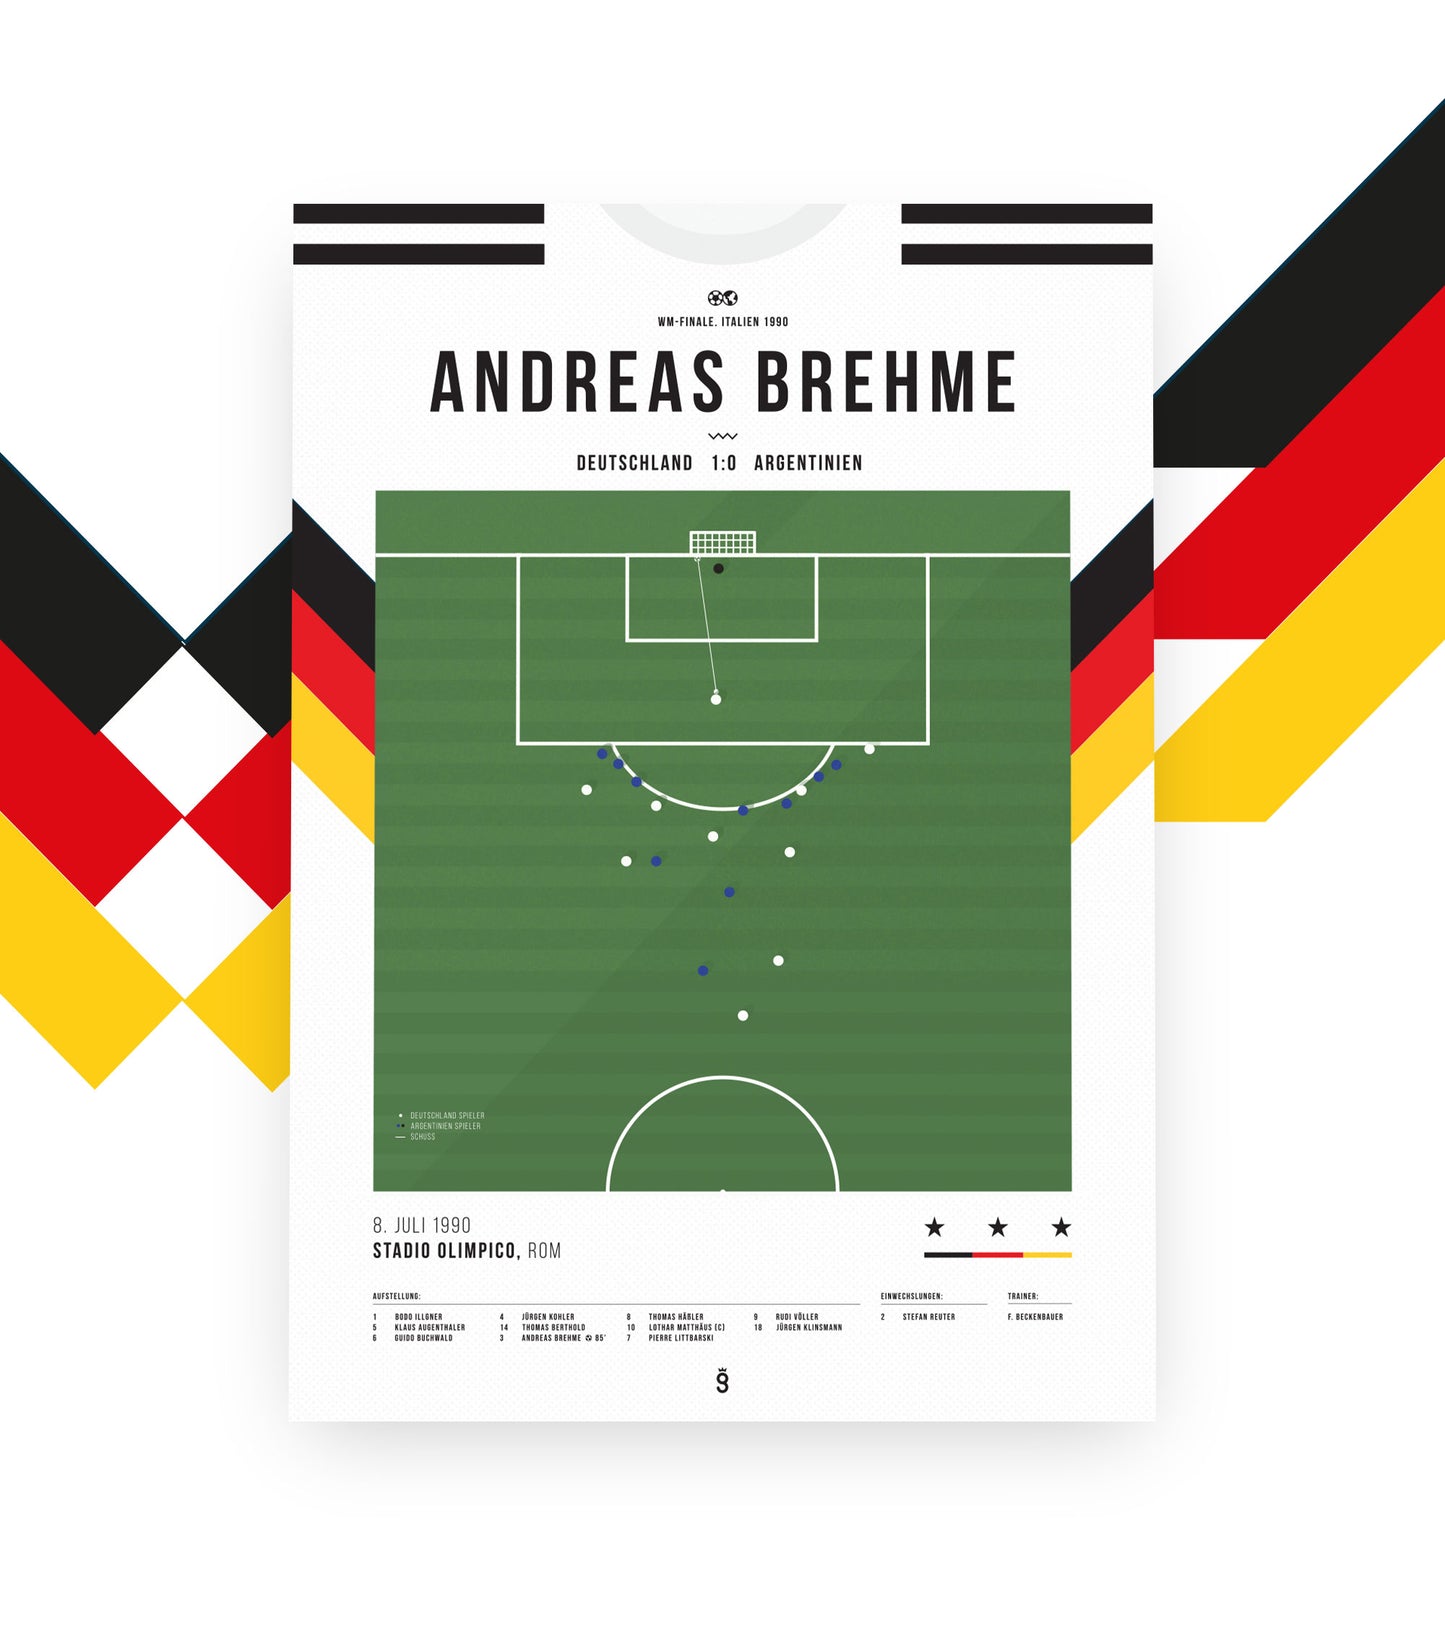 Andreas Brehme World Cup winning penalty vs Argentina 1990